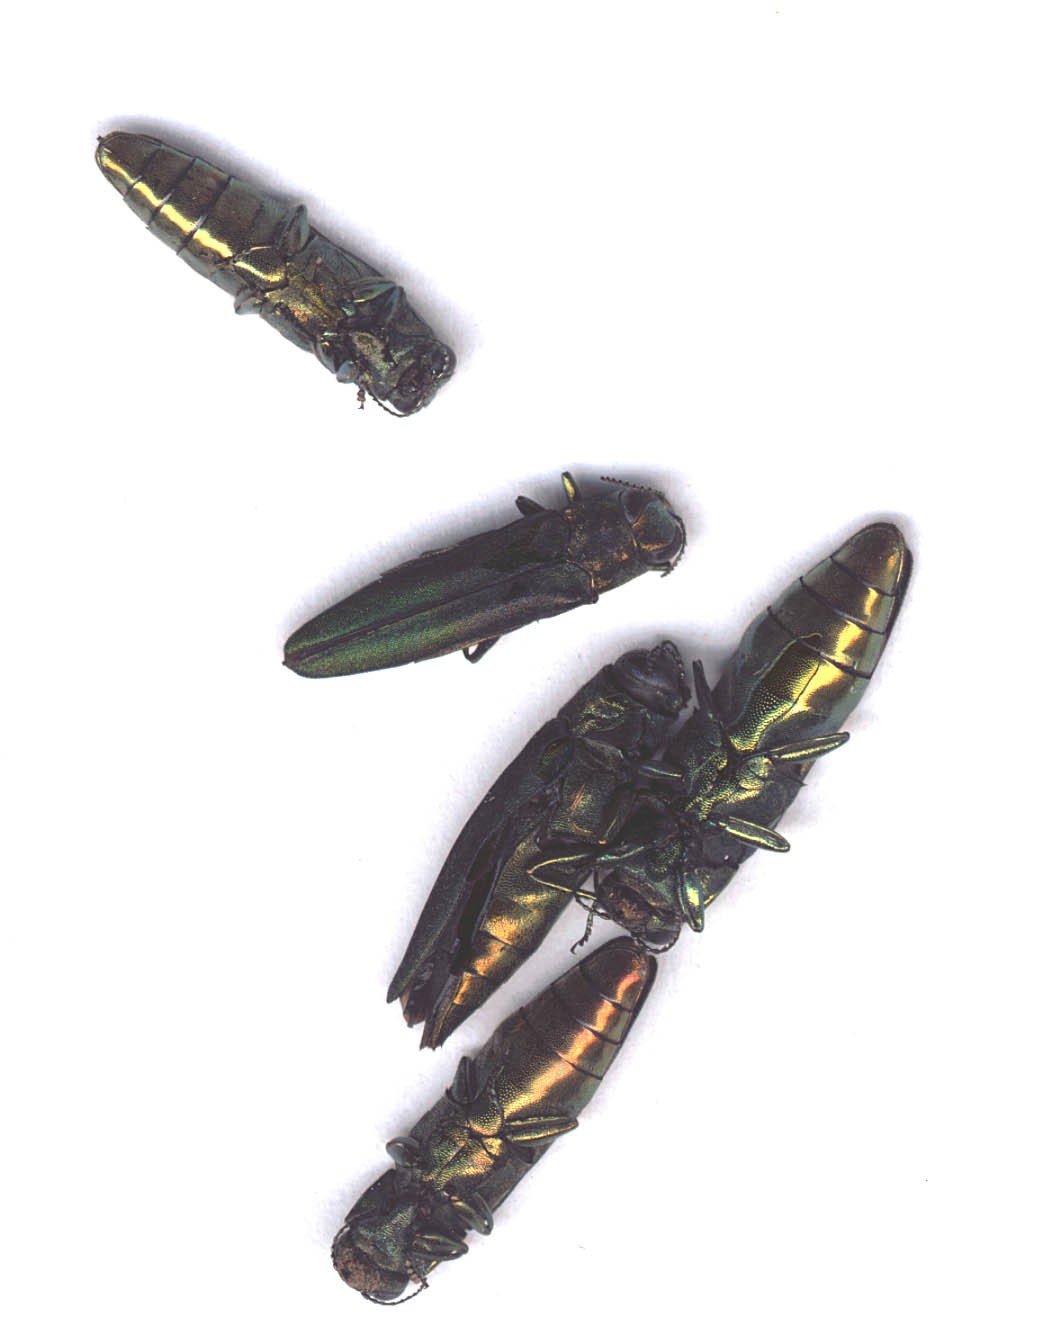 Five metallic green beetles against a white background.